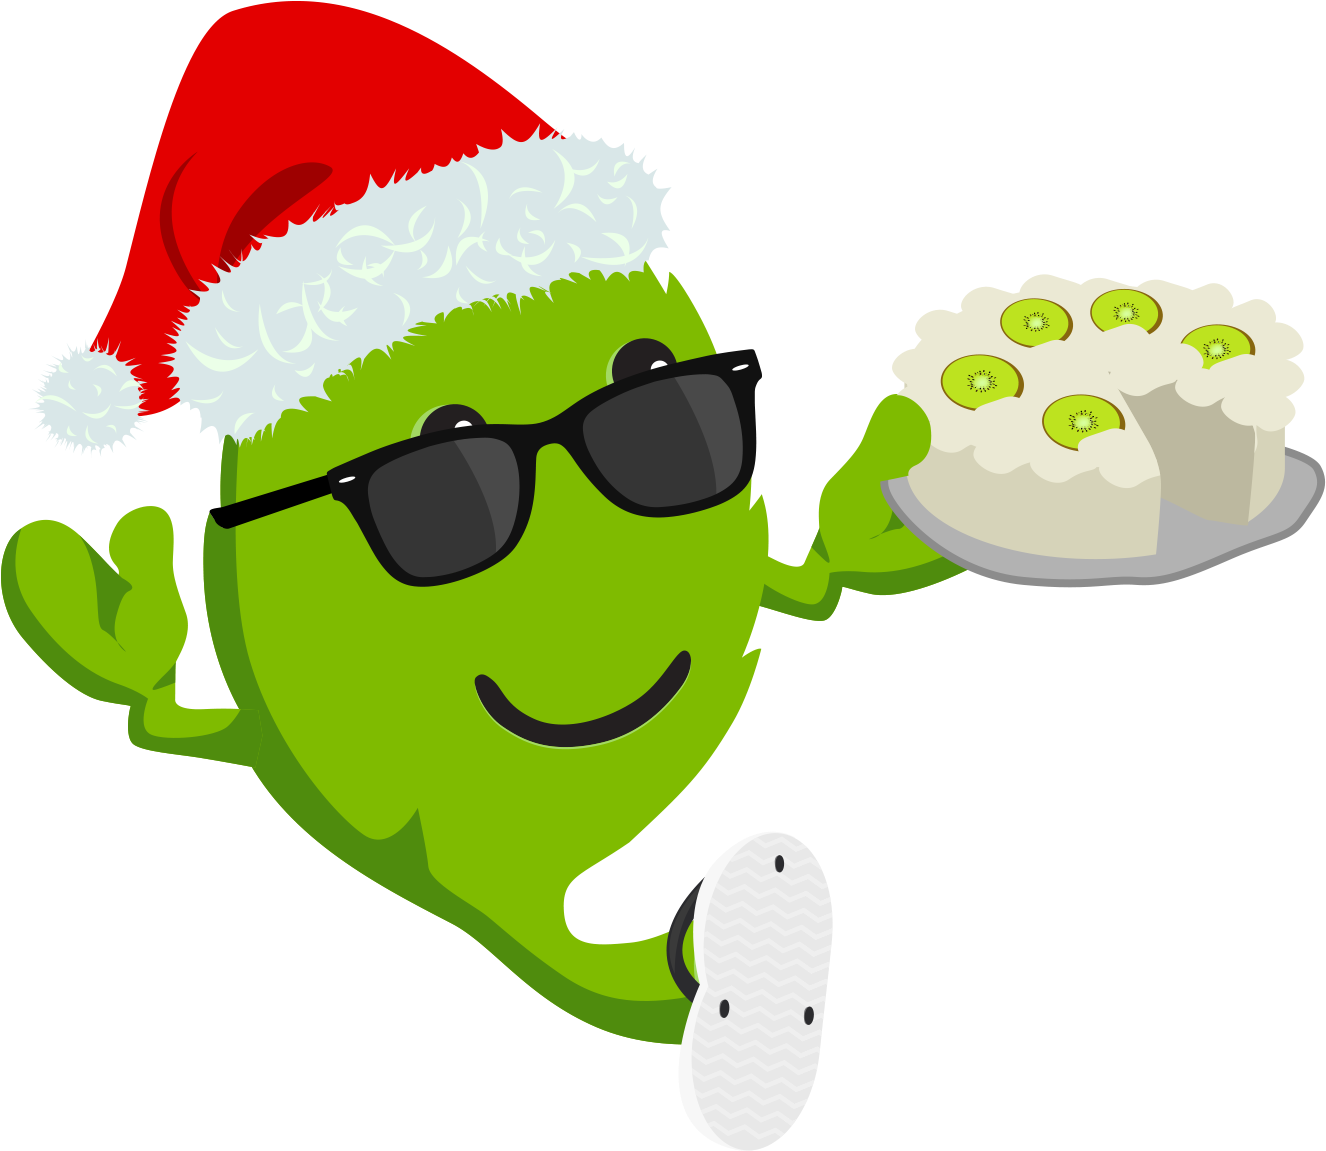 5 Easy Ways To Make Your Christmas A Little Greener - 5 Easy Ways To Make Your Christmas A Little Greener (1772x1772)